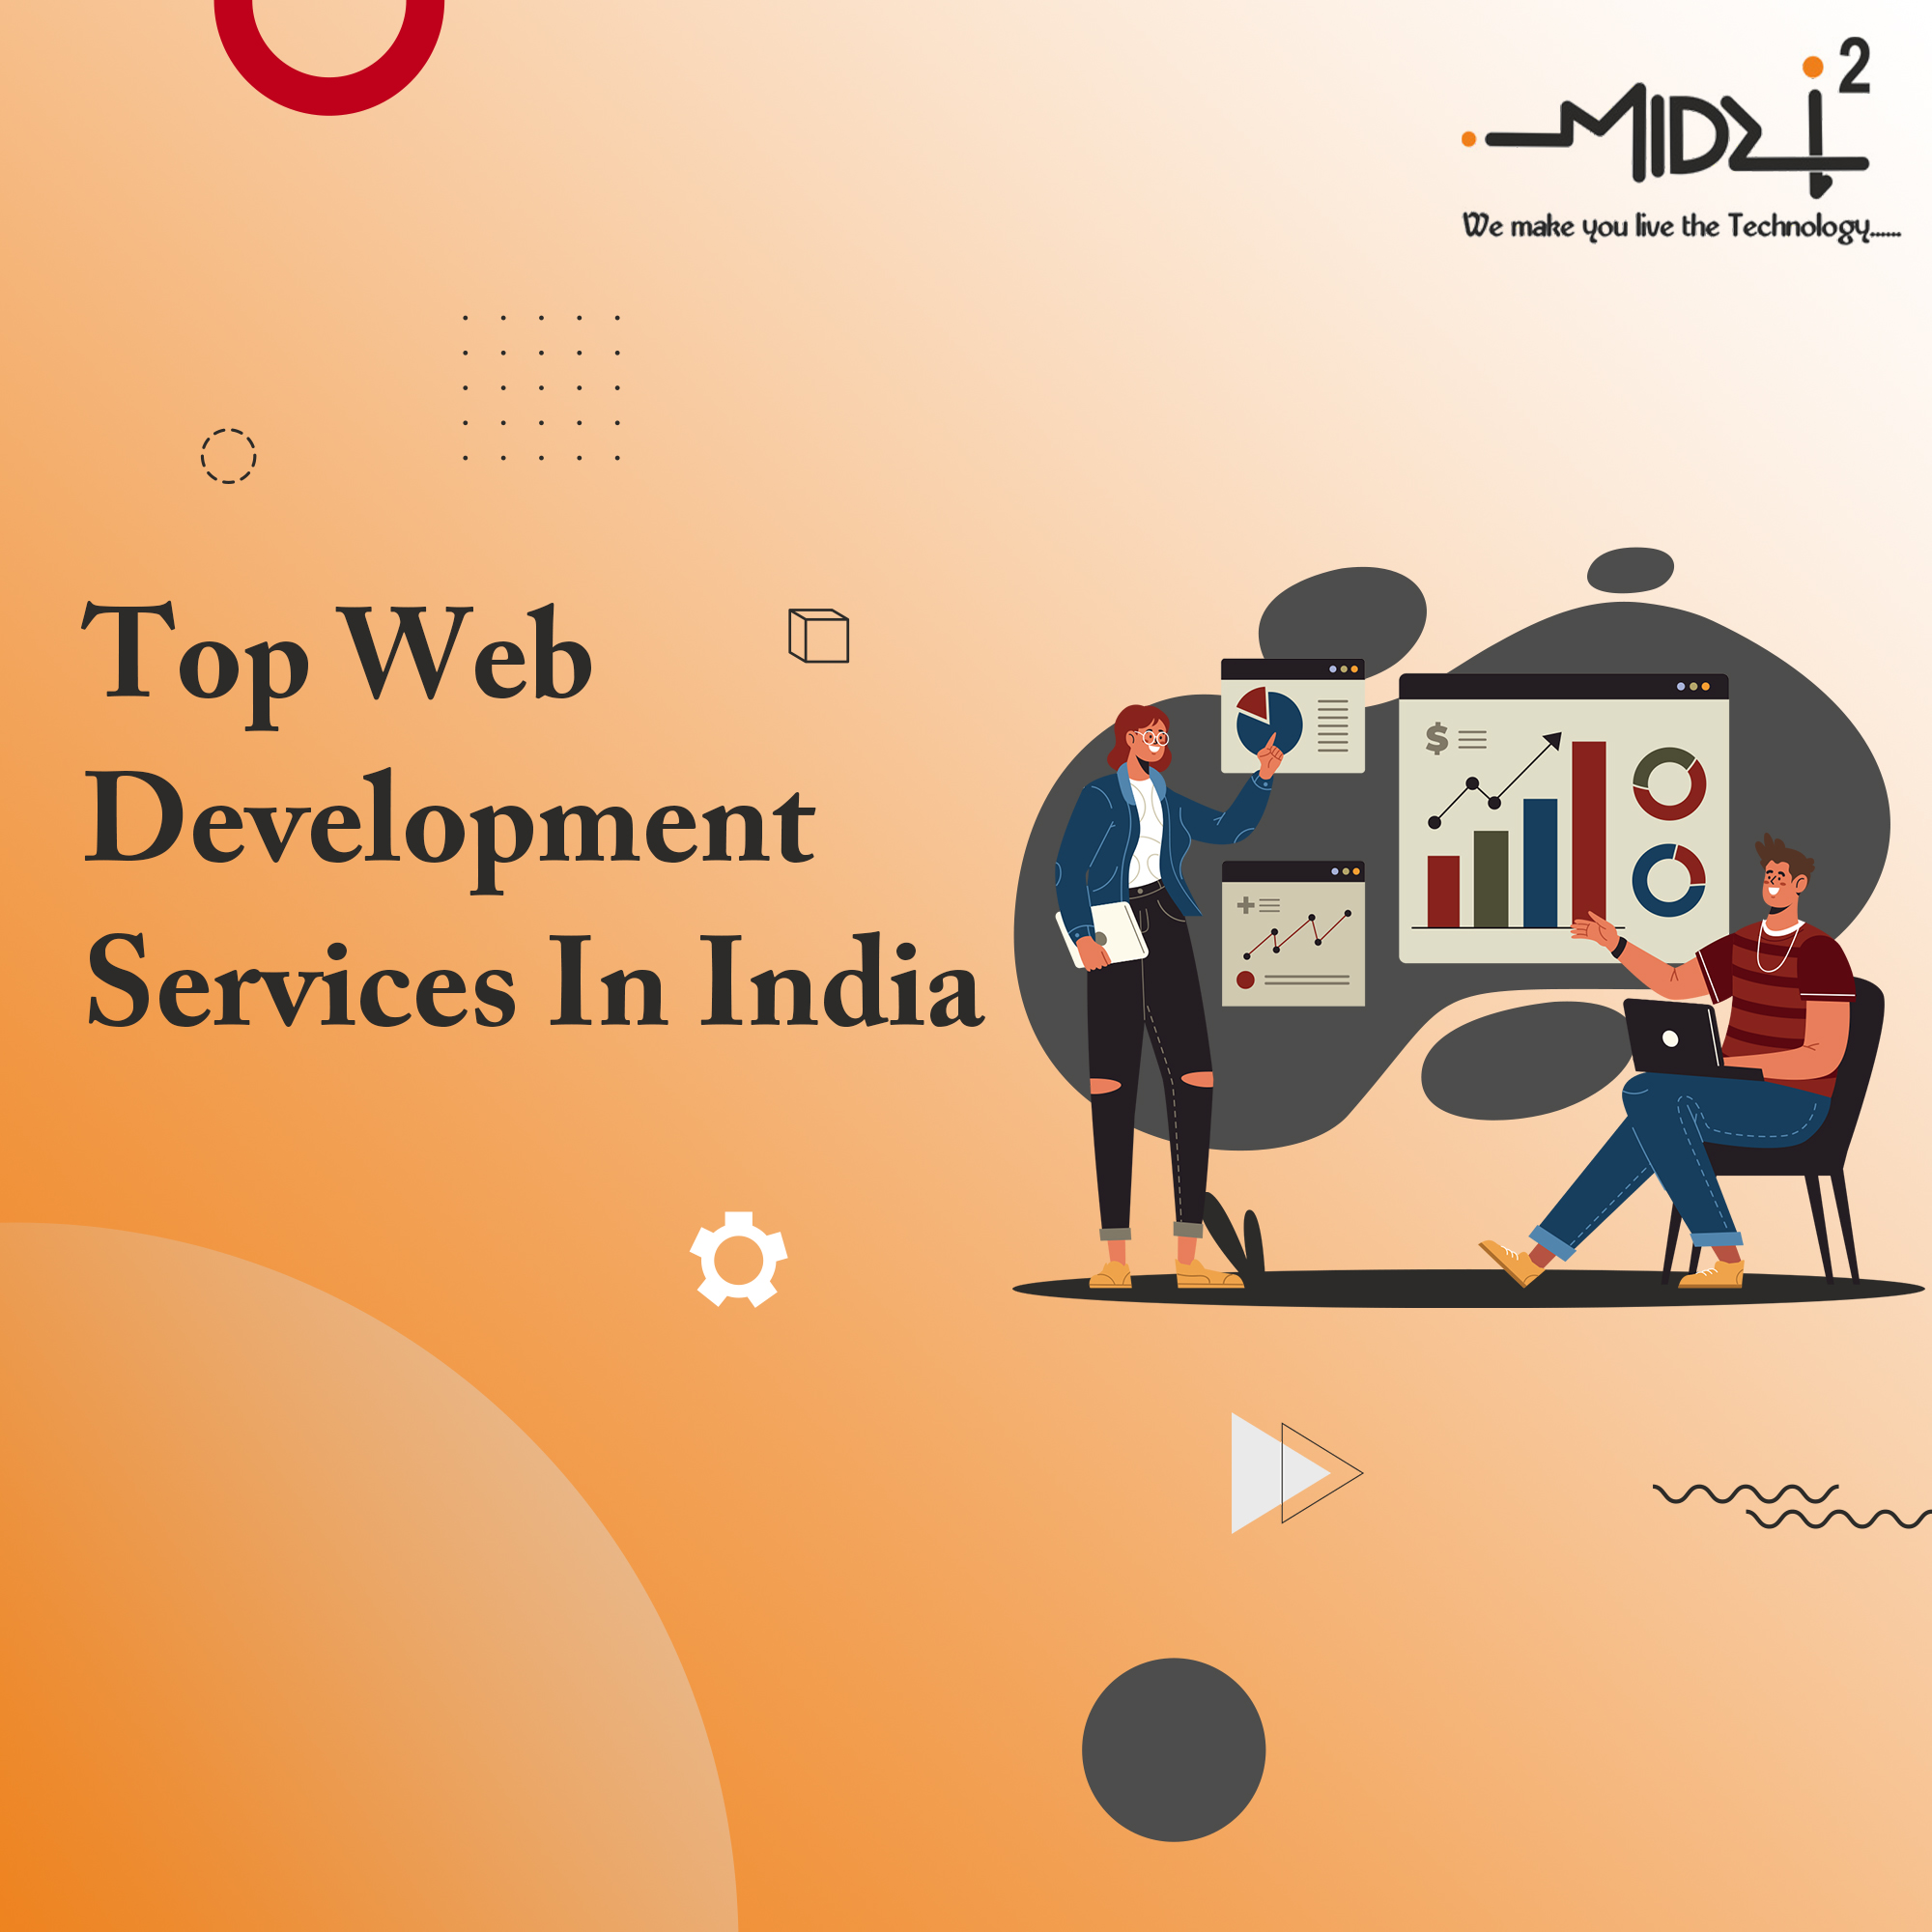 Top Web Development Services In India